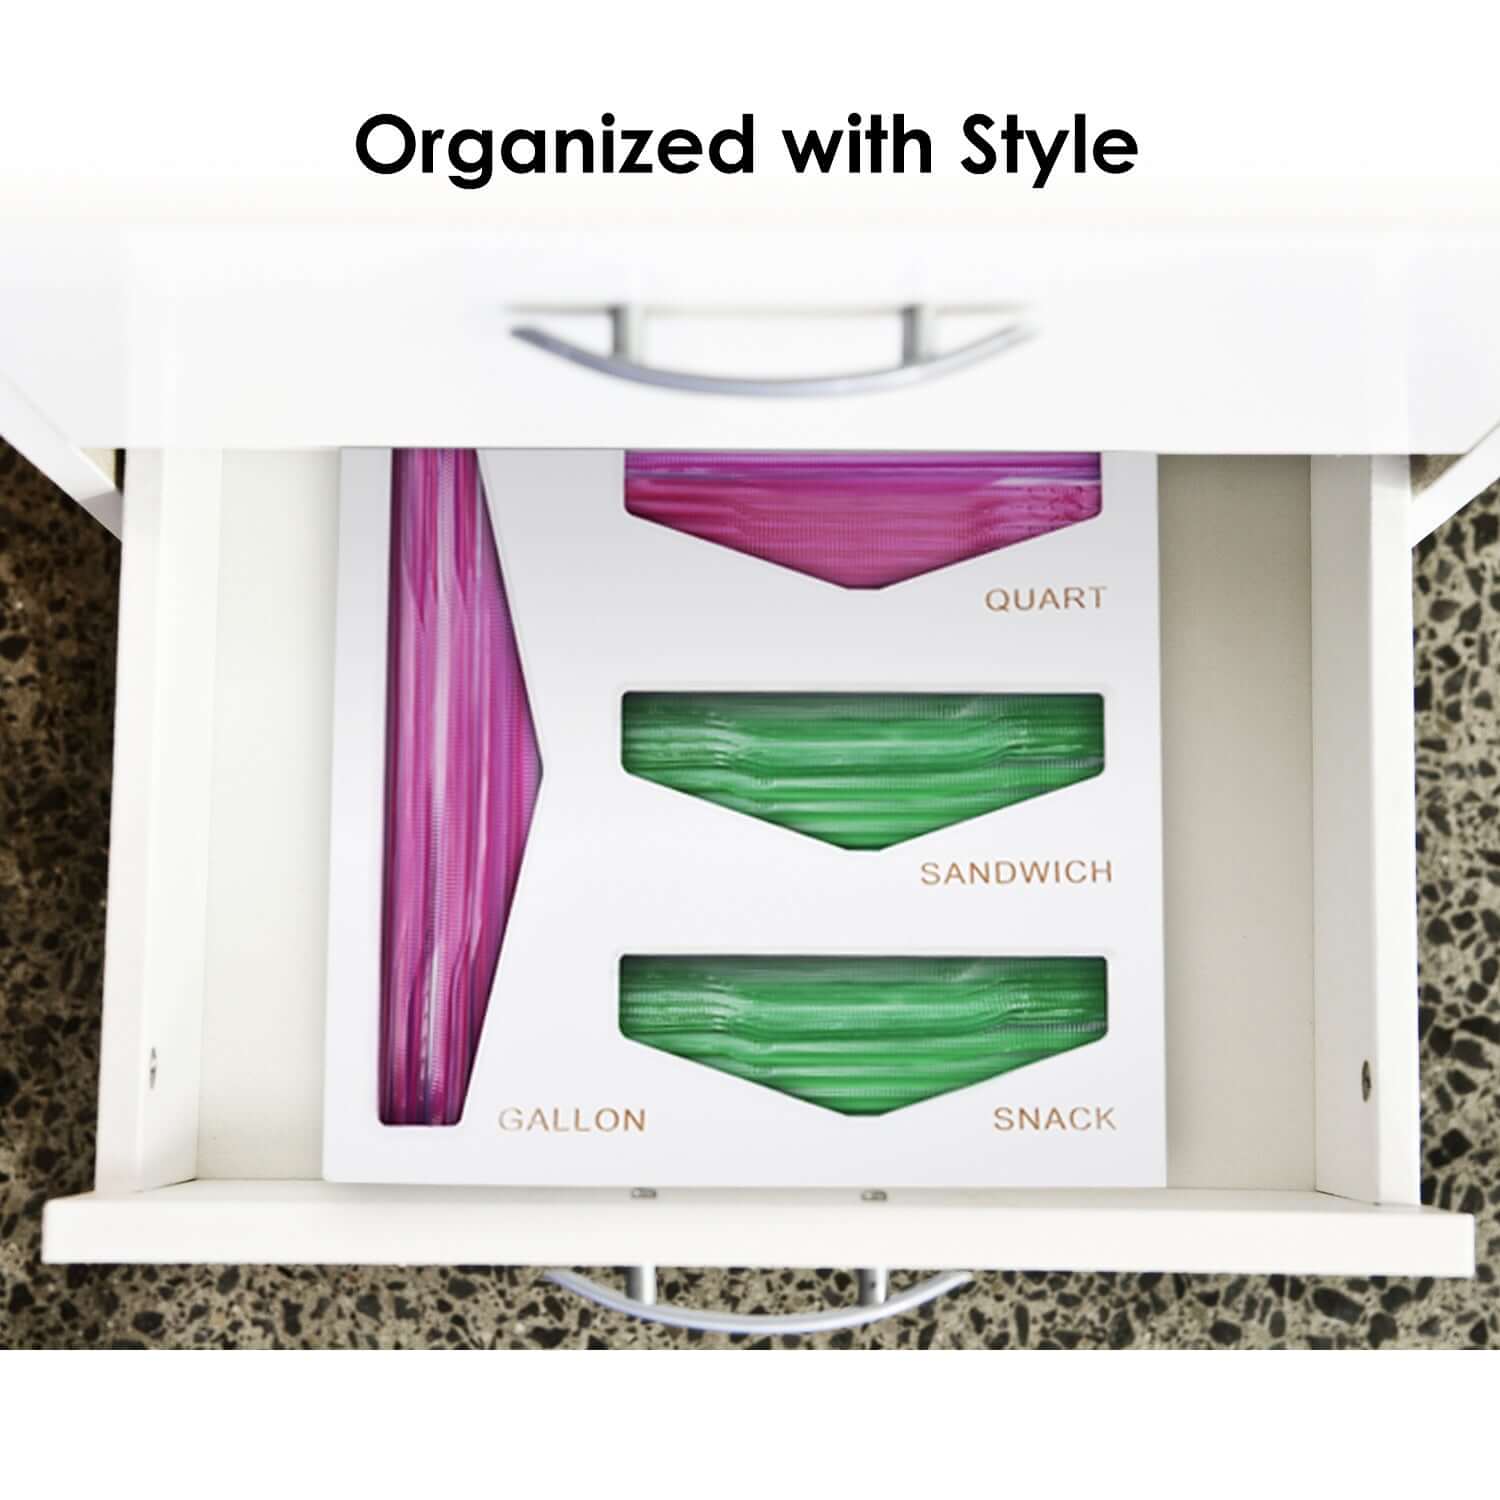 Styled By AVA Bamboo Ziplock Bag Organizer For Drawer - 20 Bags